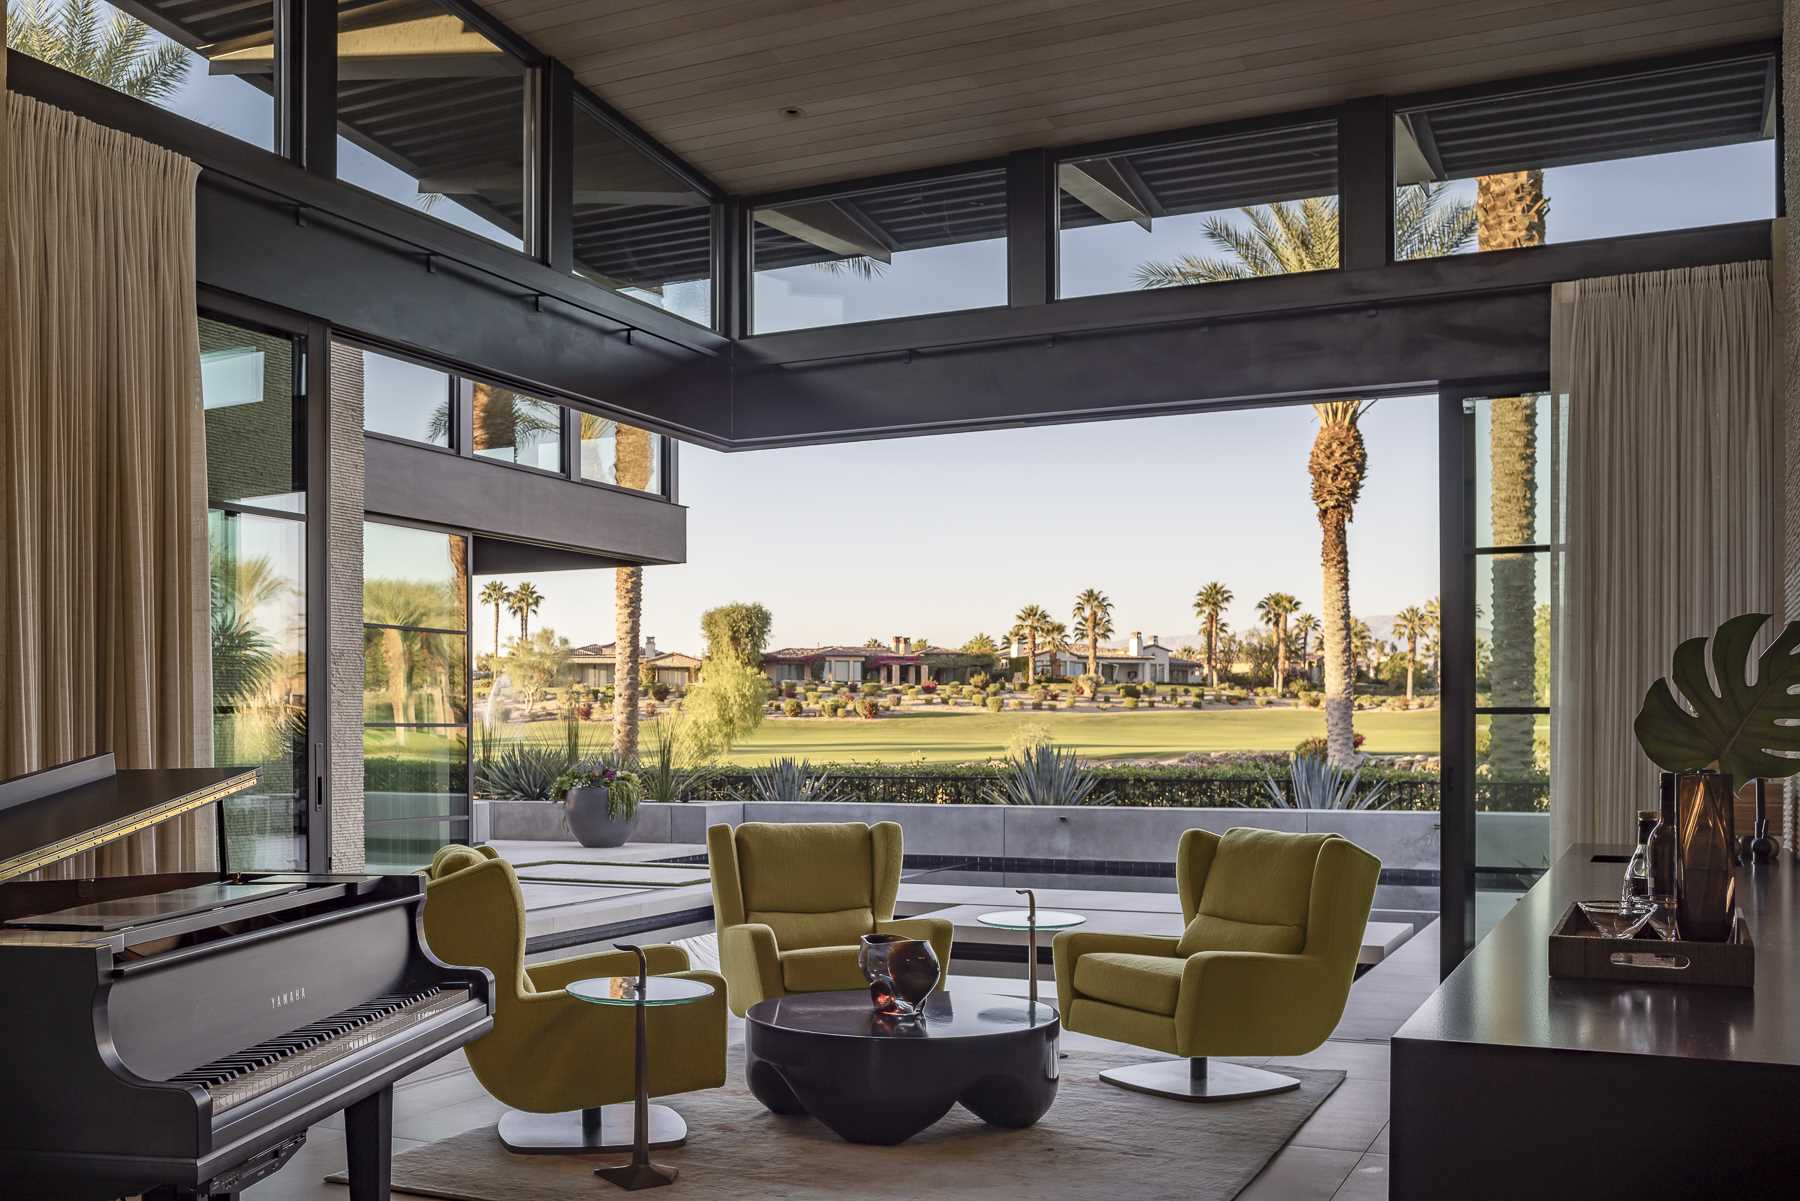 The interior ceiling of this modern house transitions from wood to steel decking at the exterior, meeting the owners' preference for durable materials in a harsh climate, while the glass walls open to connect with the outdoors.